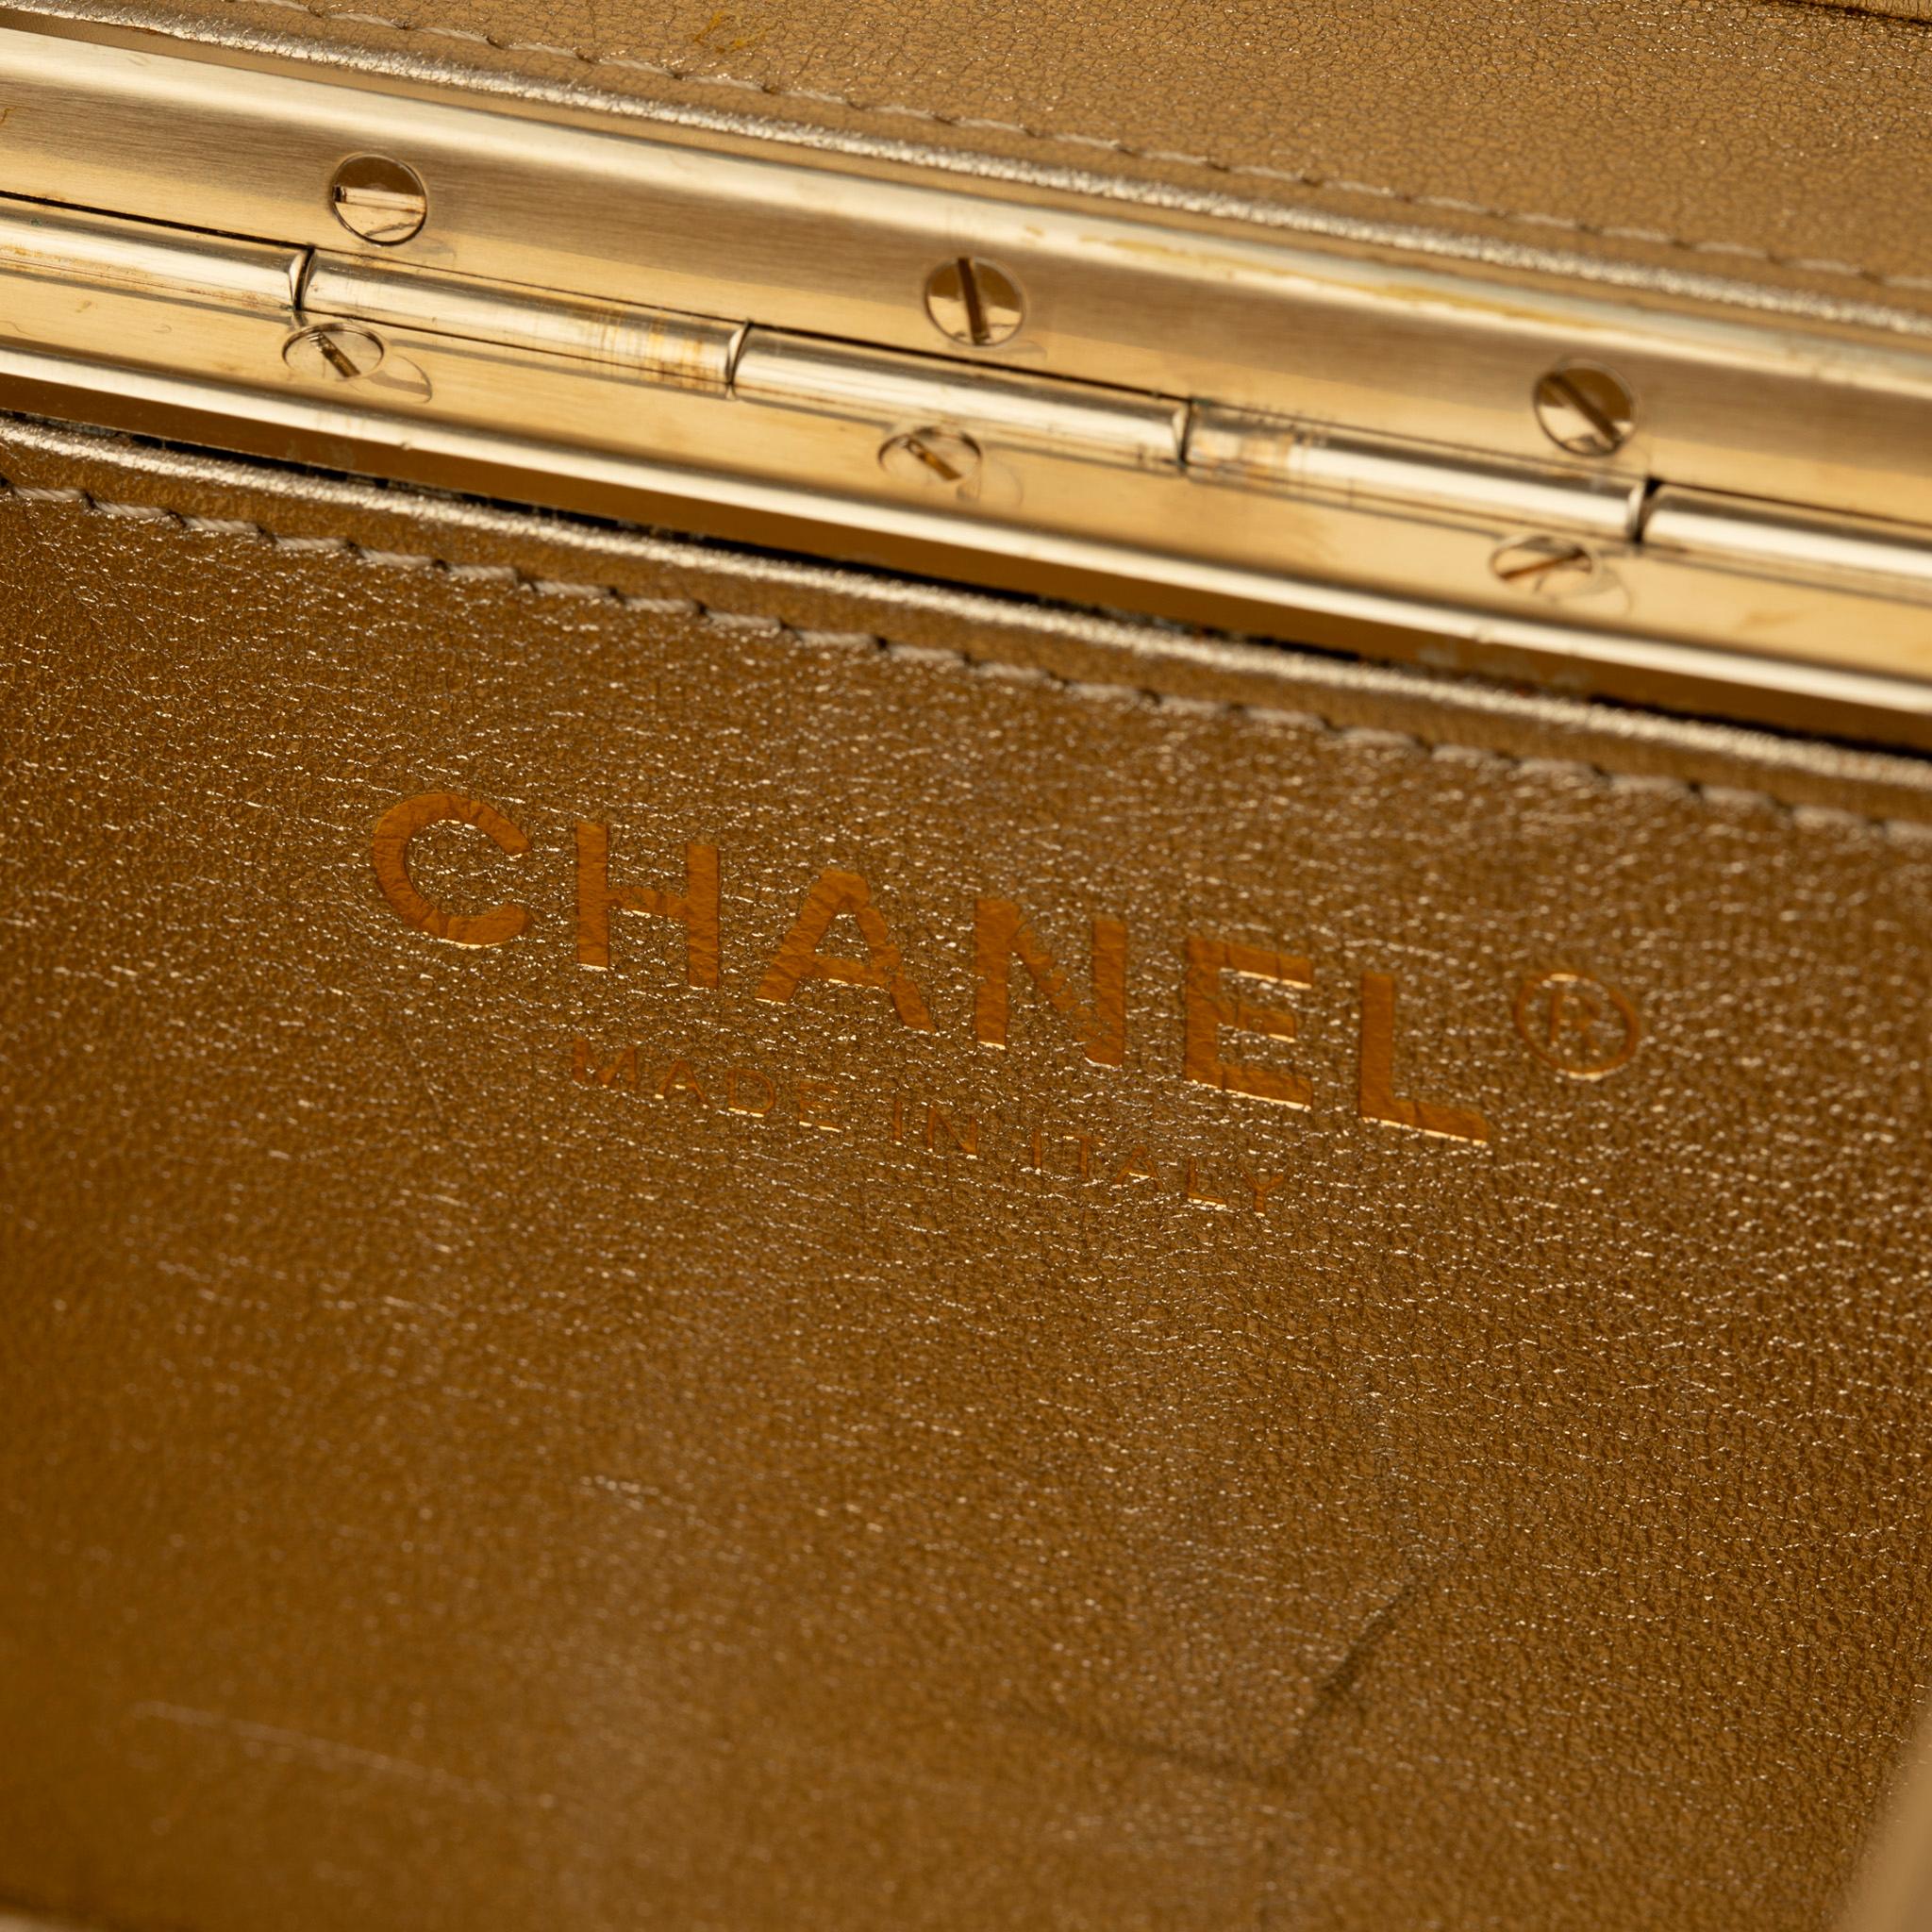 Chanel Minaudière Limited Edition Casino Dice Black Gold-Tone Hardware For Sale 8